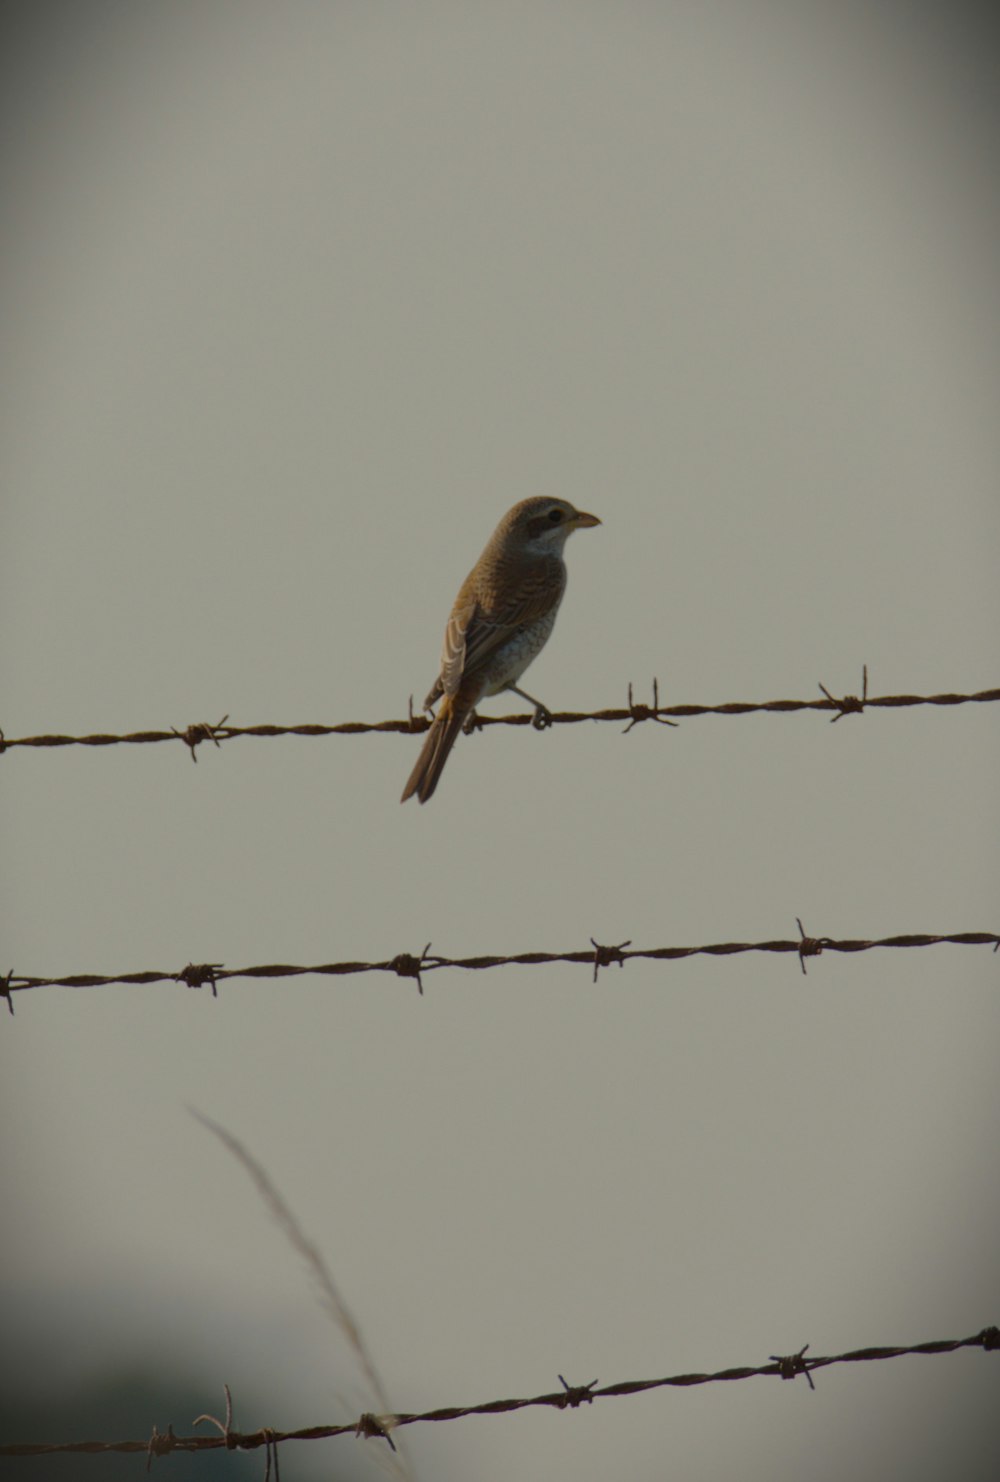 a small bird sitting on top of a barbed wire fence